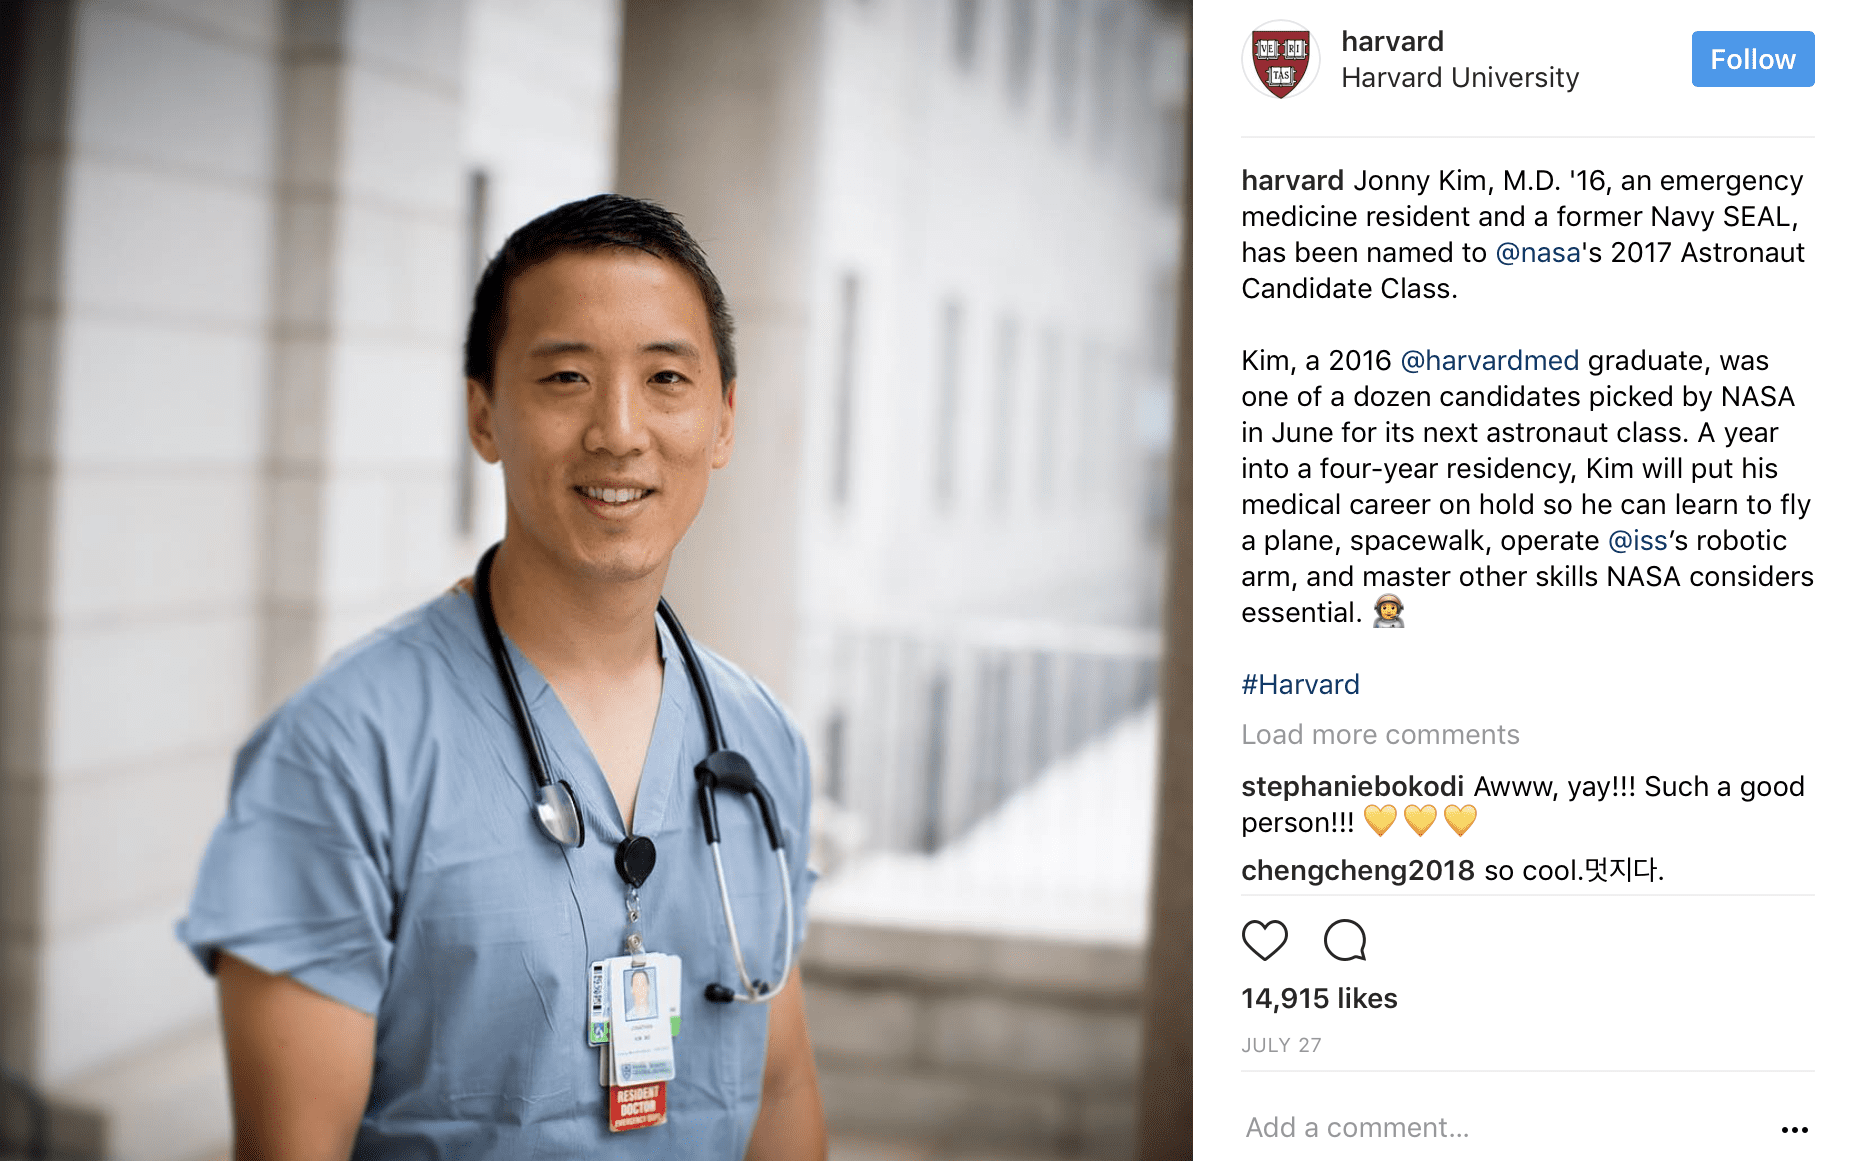 for example the following image gives a shout out to jonny kim an emergency medicine resident who has been named to nasa s 2017 a!   stronaut candidate class - medical instagram accounts to follow